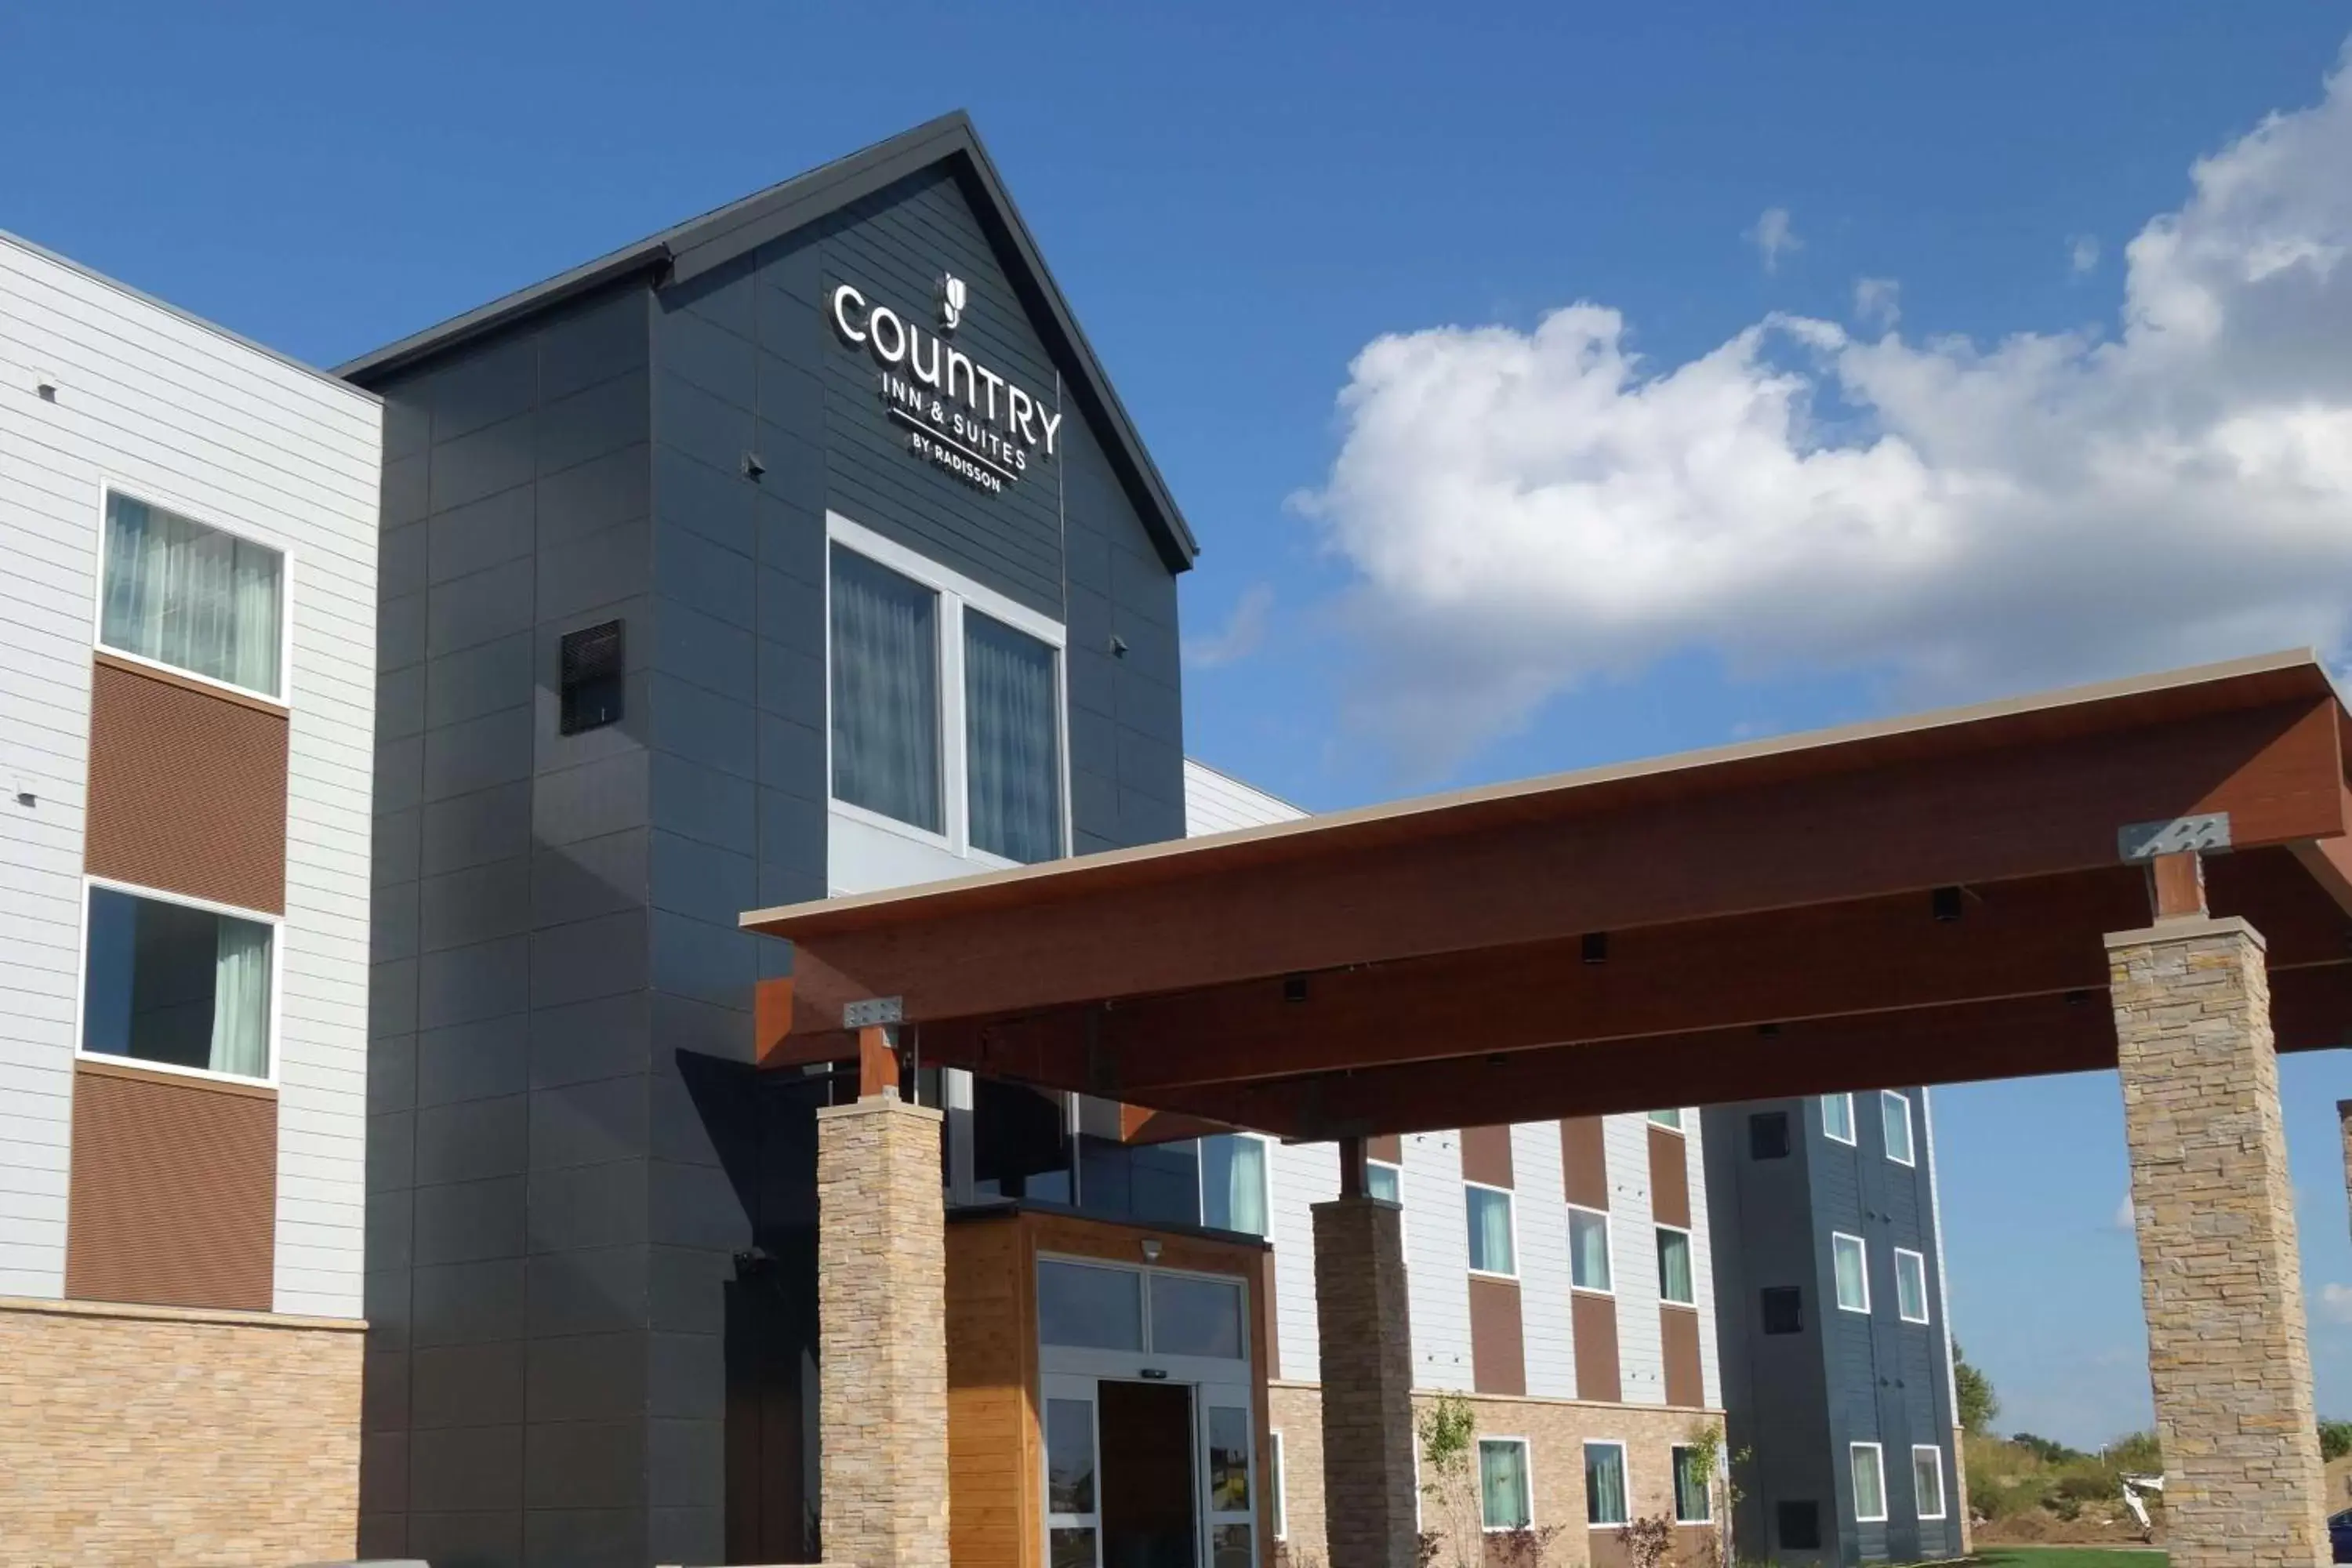 Property building in Country Inn & Suites by Radisson, Ft. Atkinson, WI